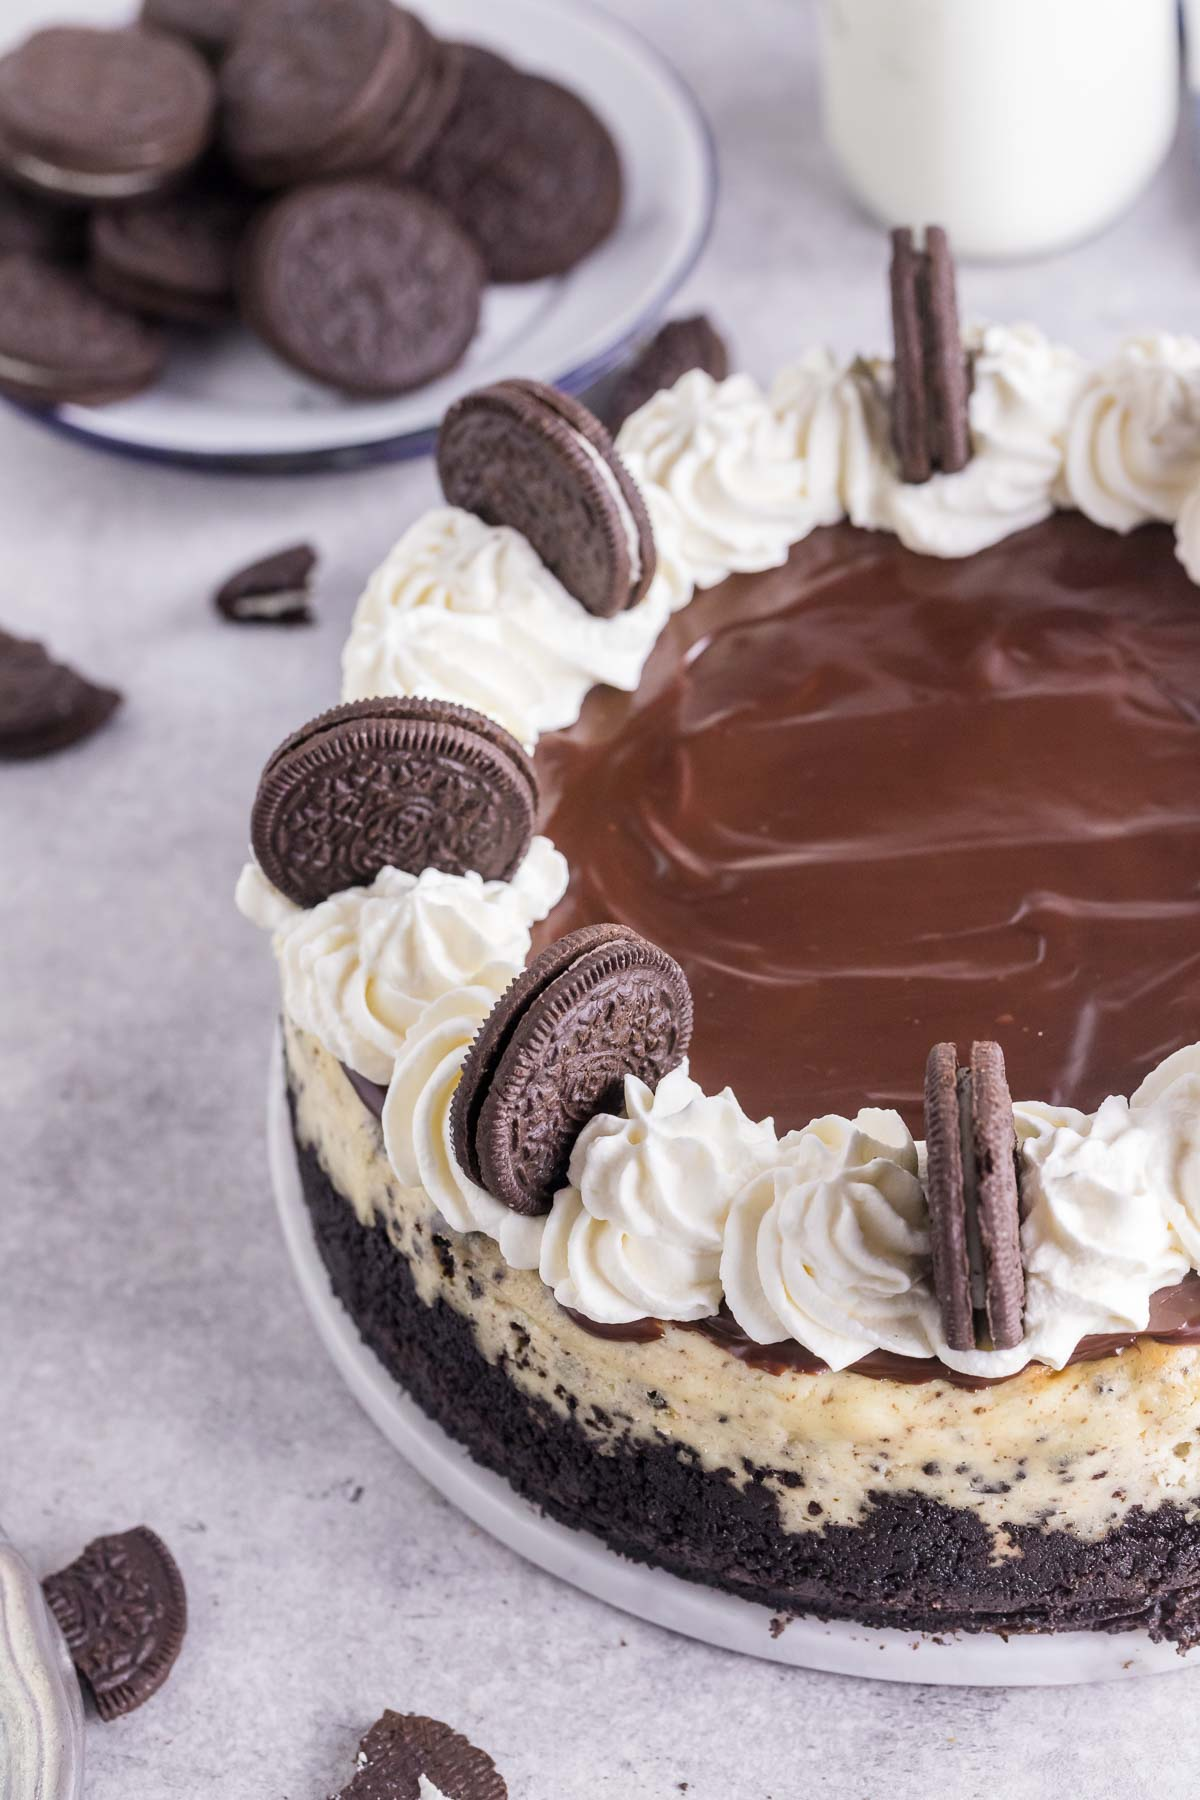 whole Oreo cheesecake topped with whipped cream and ganache